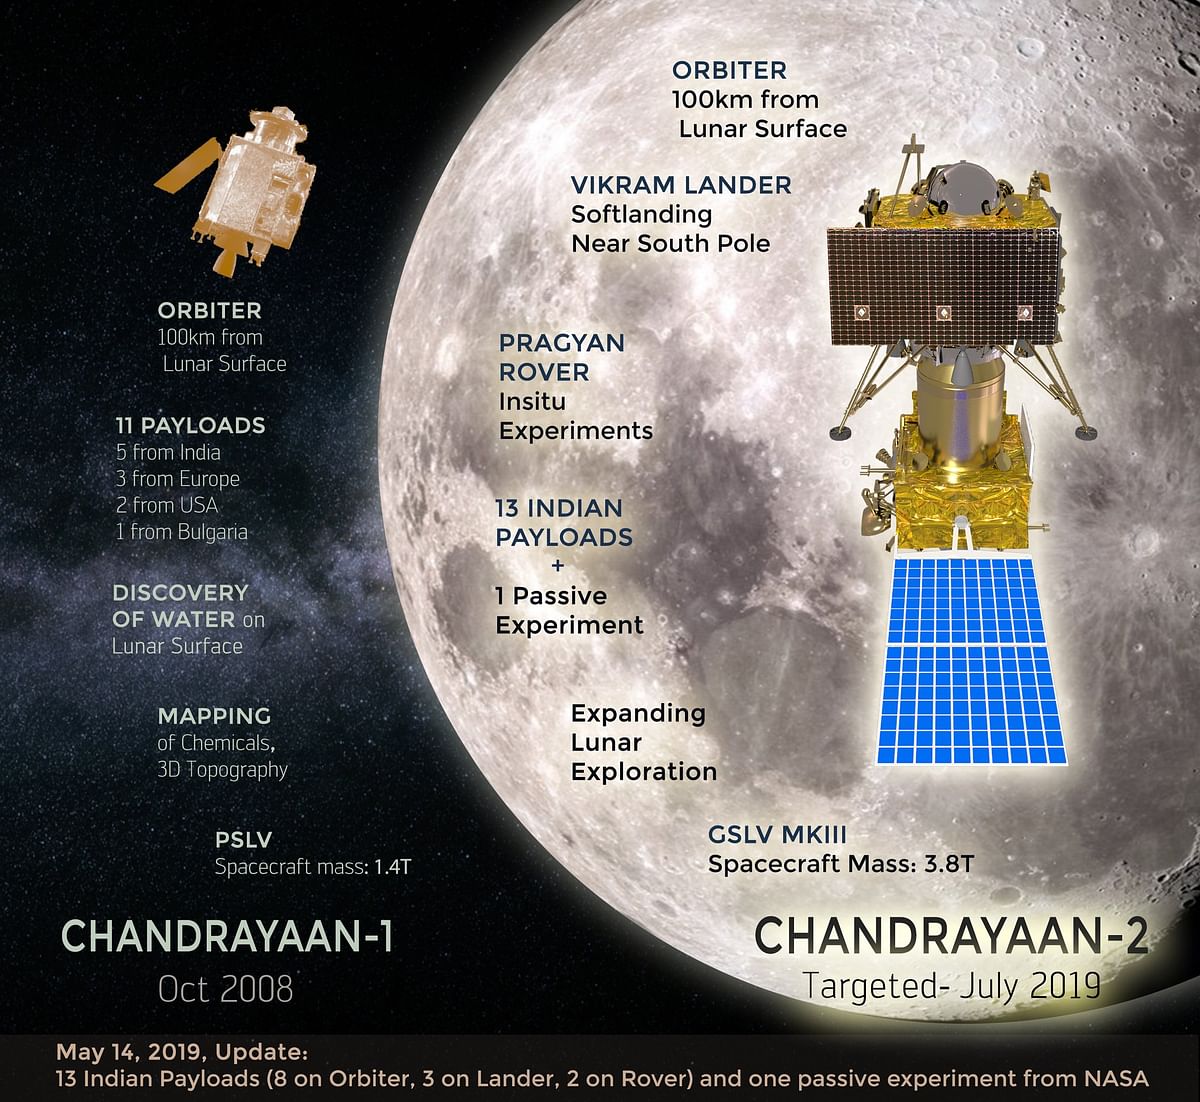 Chandrayaan-2 is expected to be launched in July and is expected to land on the Moon in September.